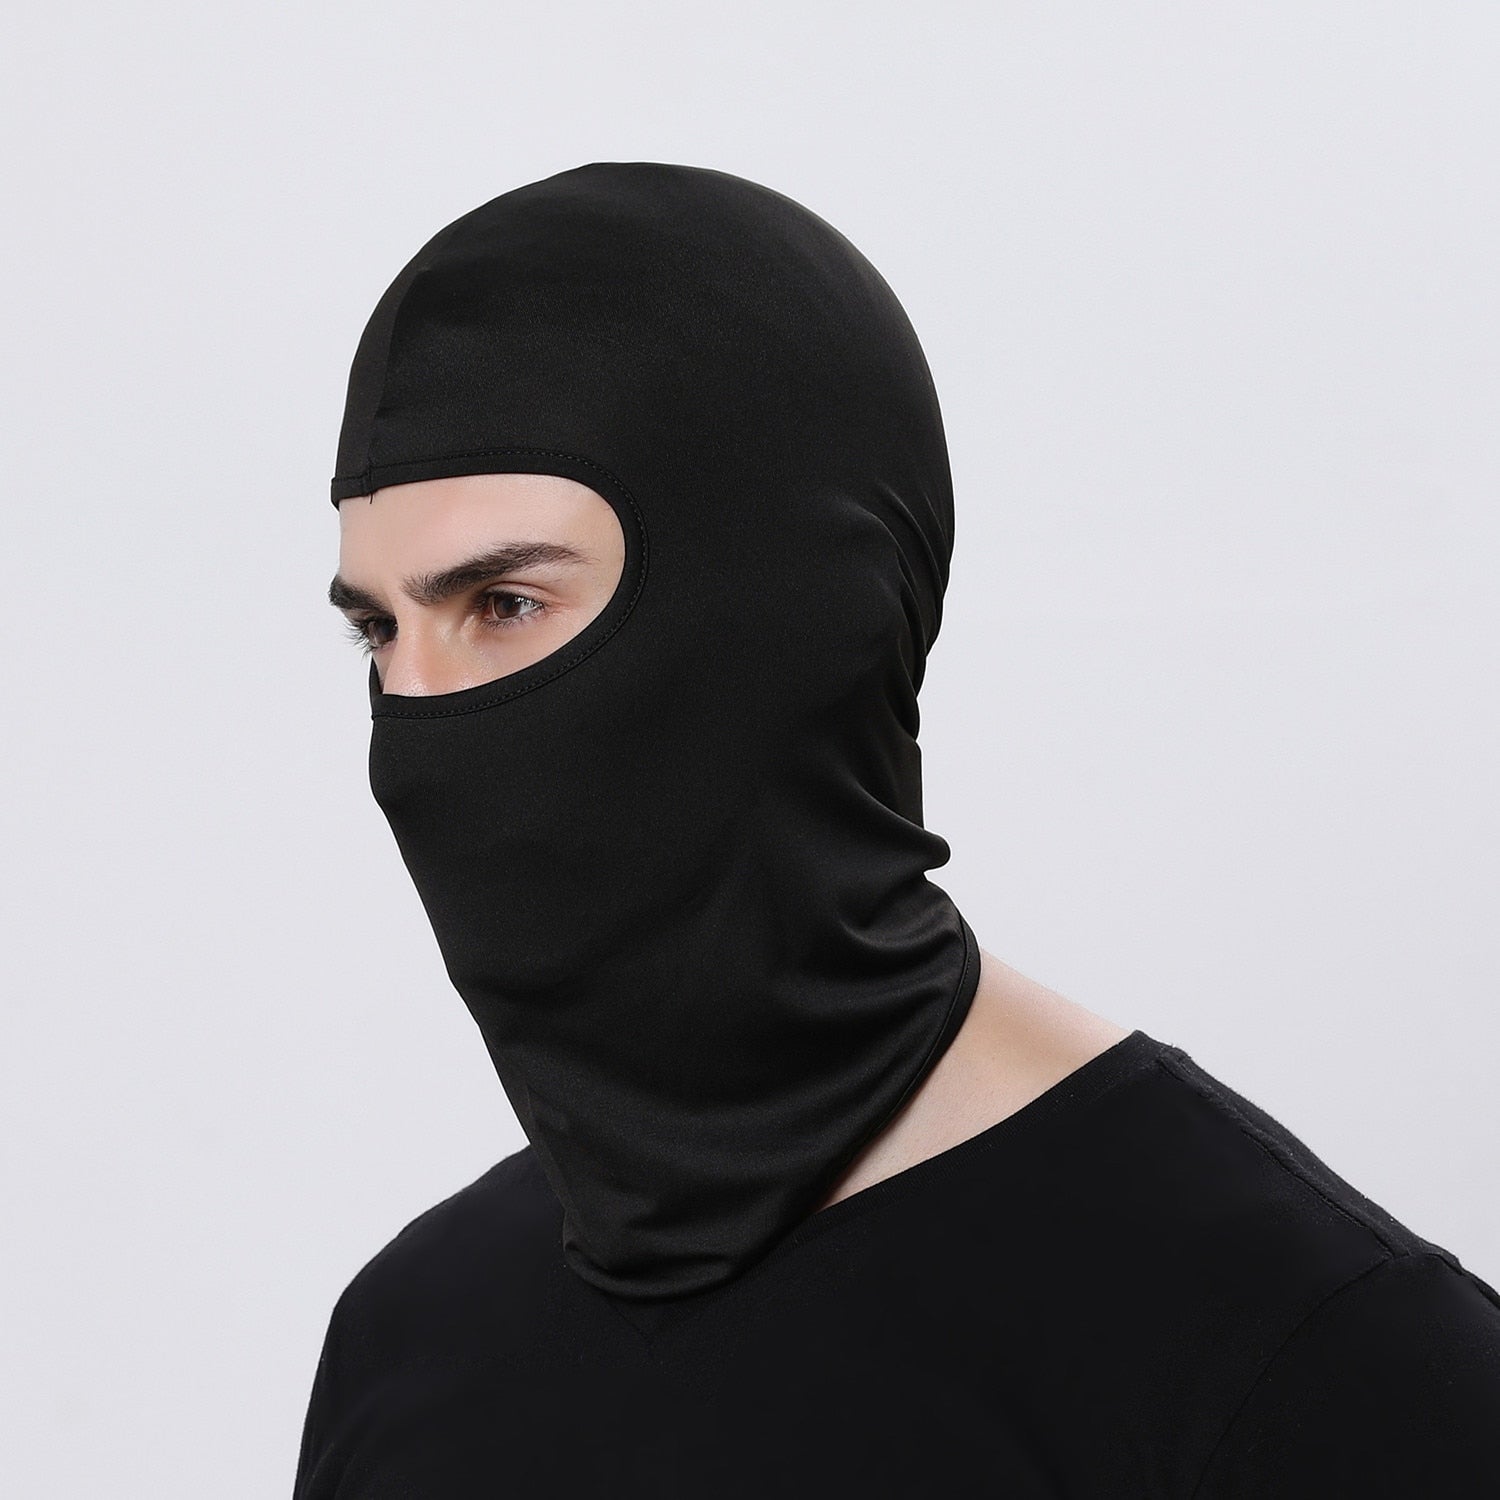 Camouflage Outdoor Cyclisme Chasse Capuche Protection Balaclava Tête Couvre- visage